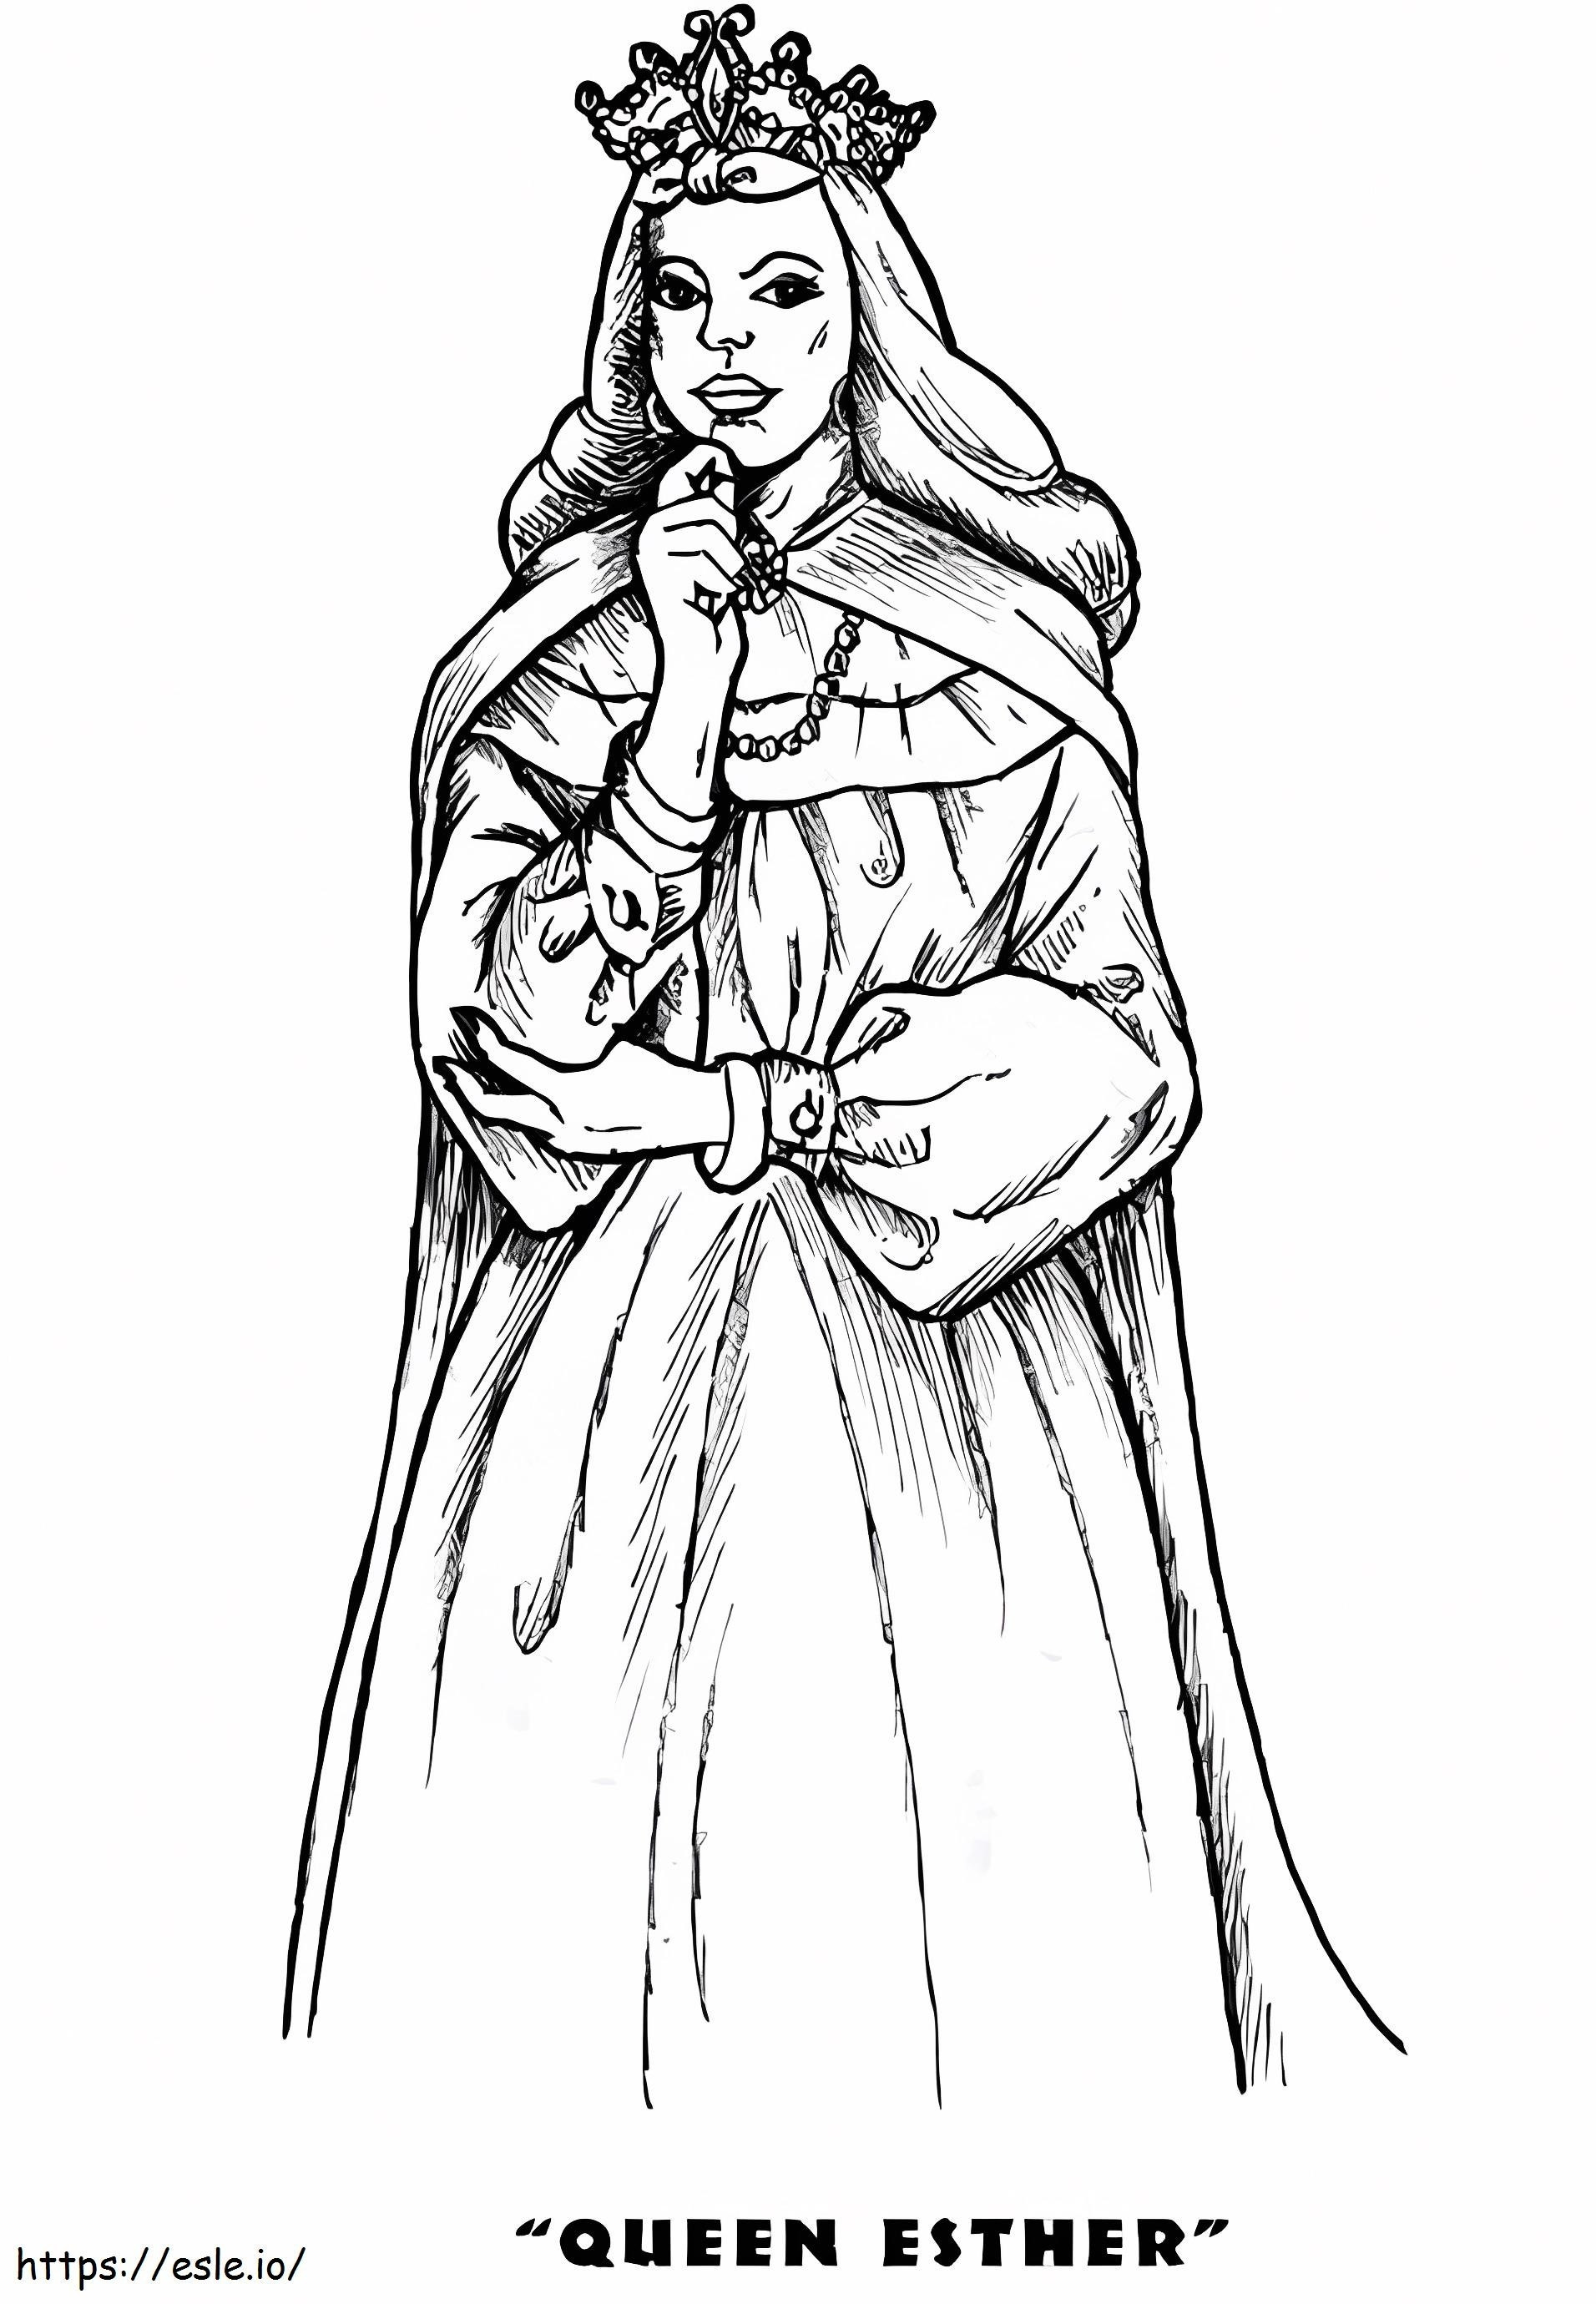 Queen Esther 1 coloring page